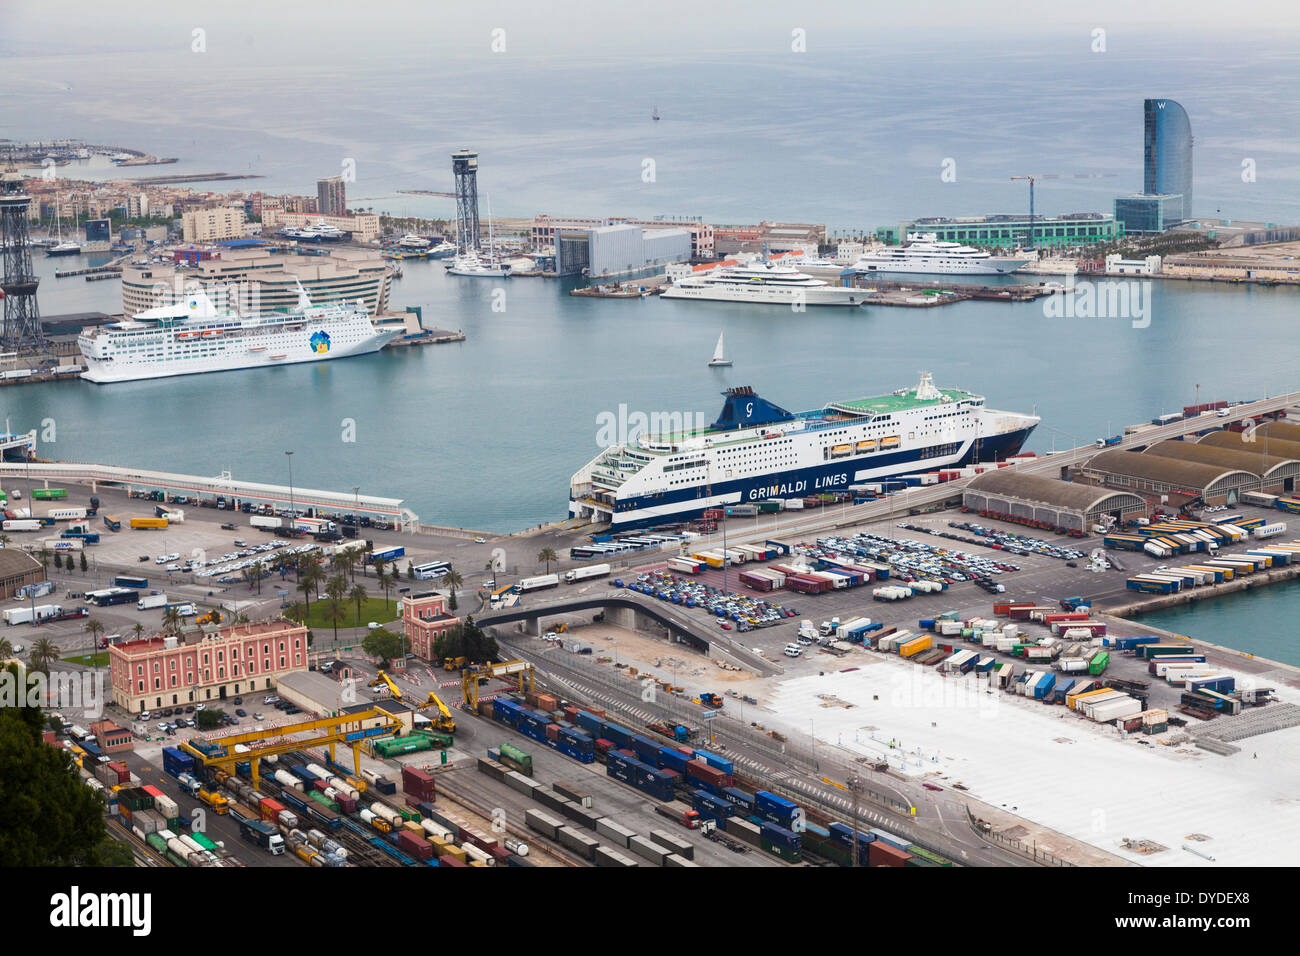 High view of railway sidings and cruise liners dock at Barcelona port. Stock Photo